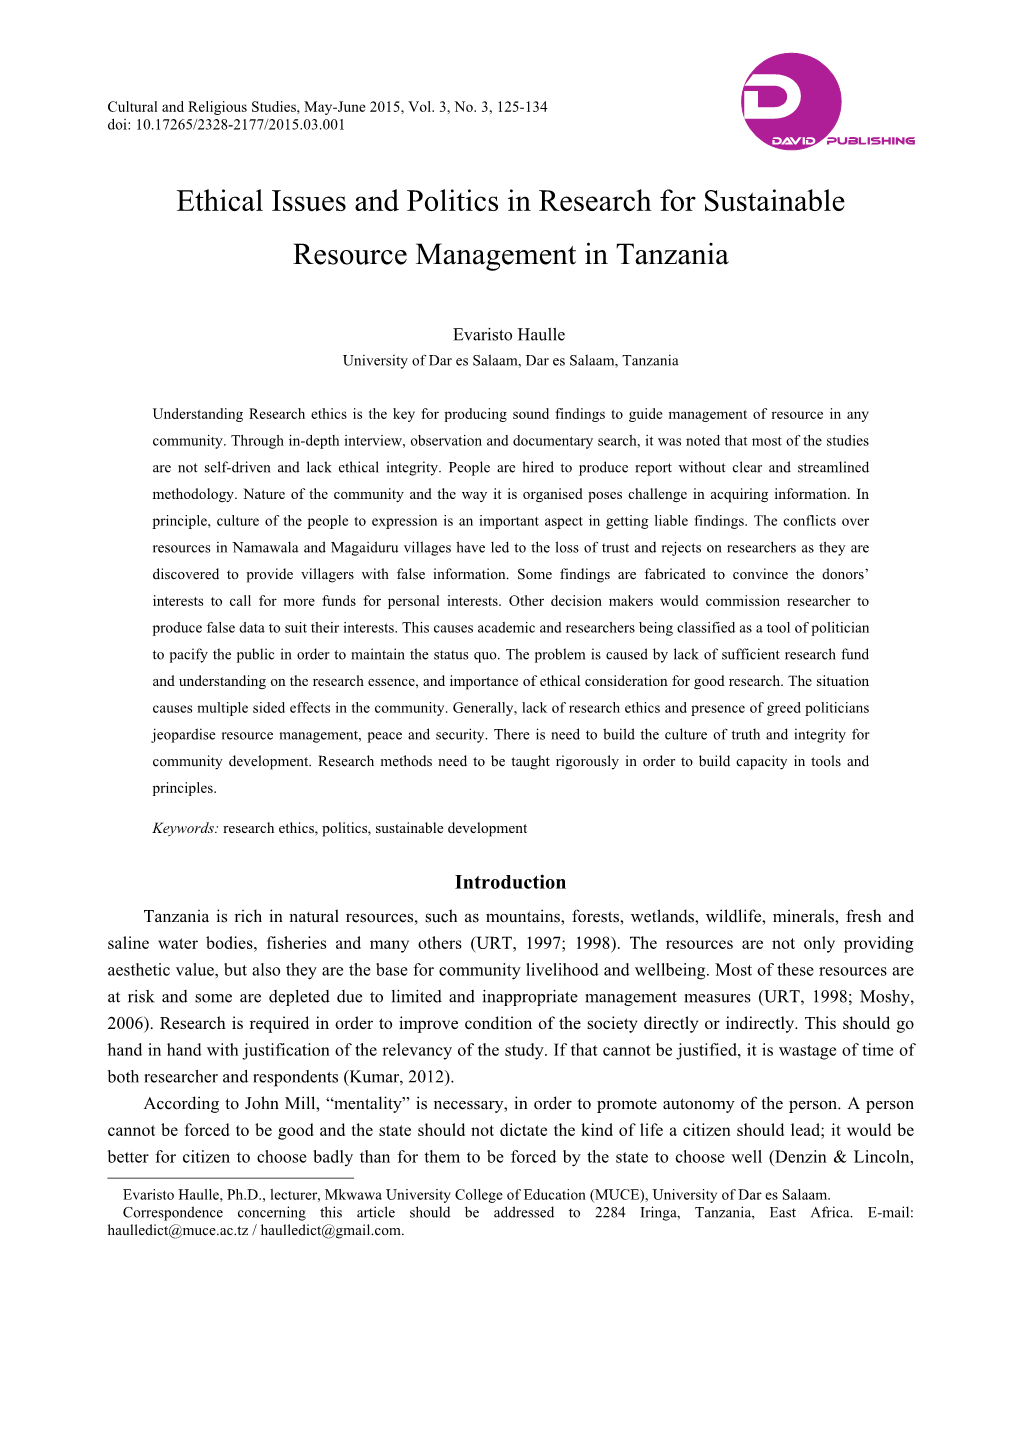 Ethical Issues and Politics in Research for Sustainable Resource Management in Tanzania